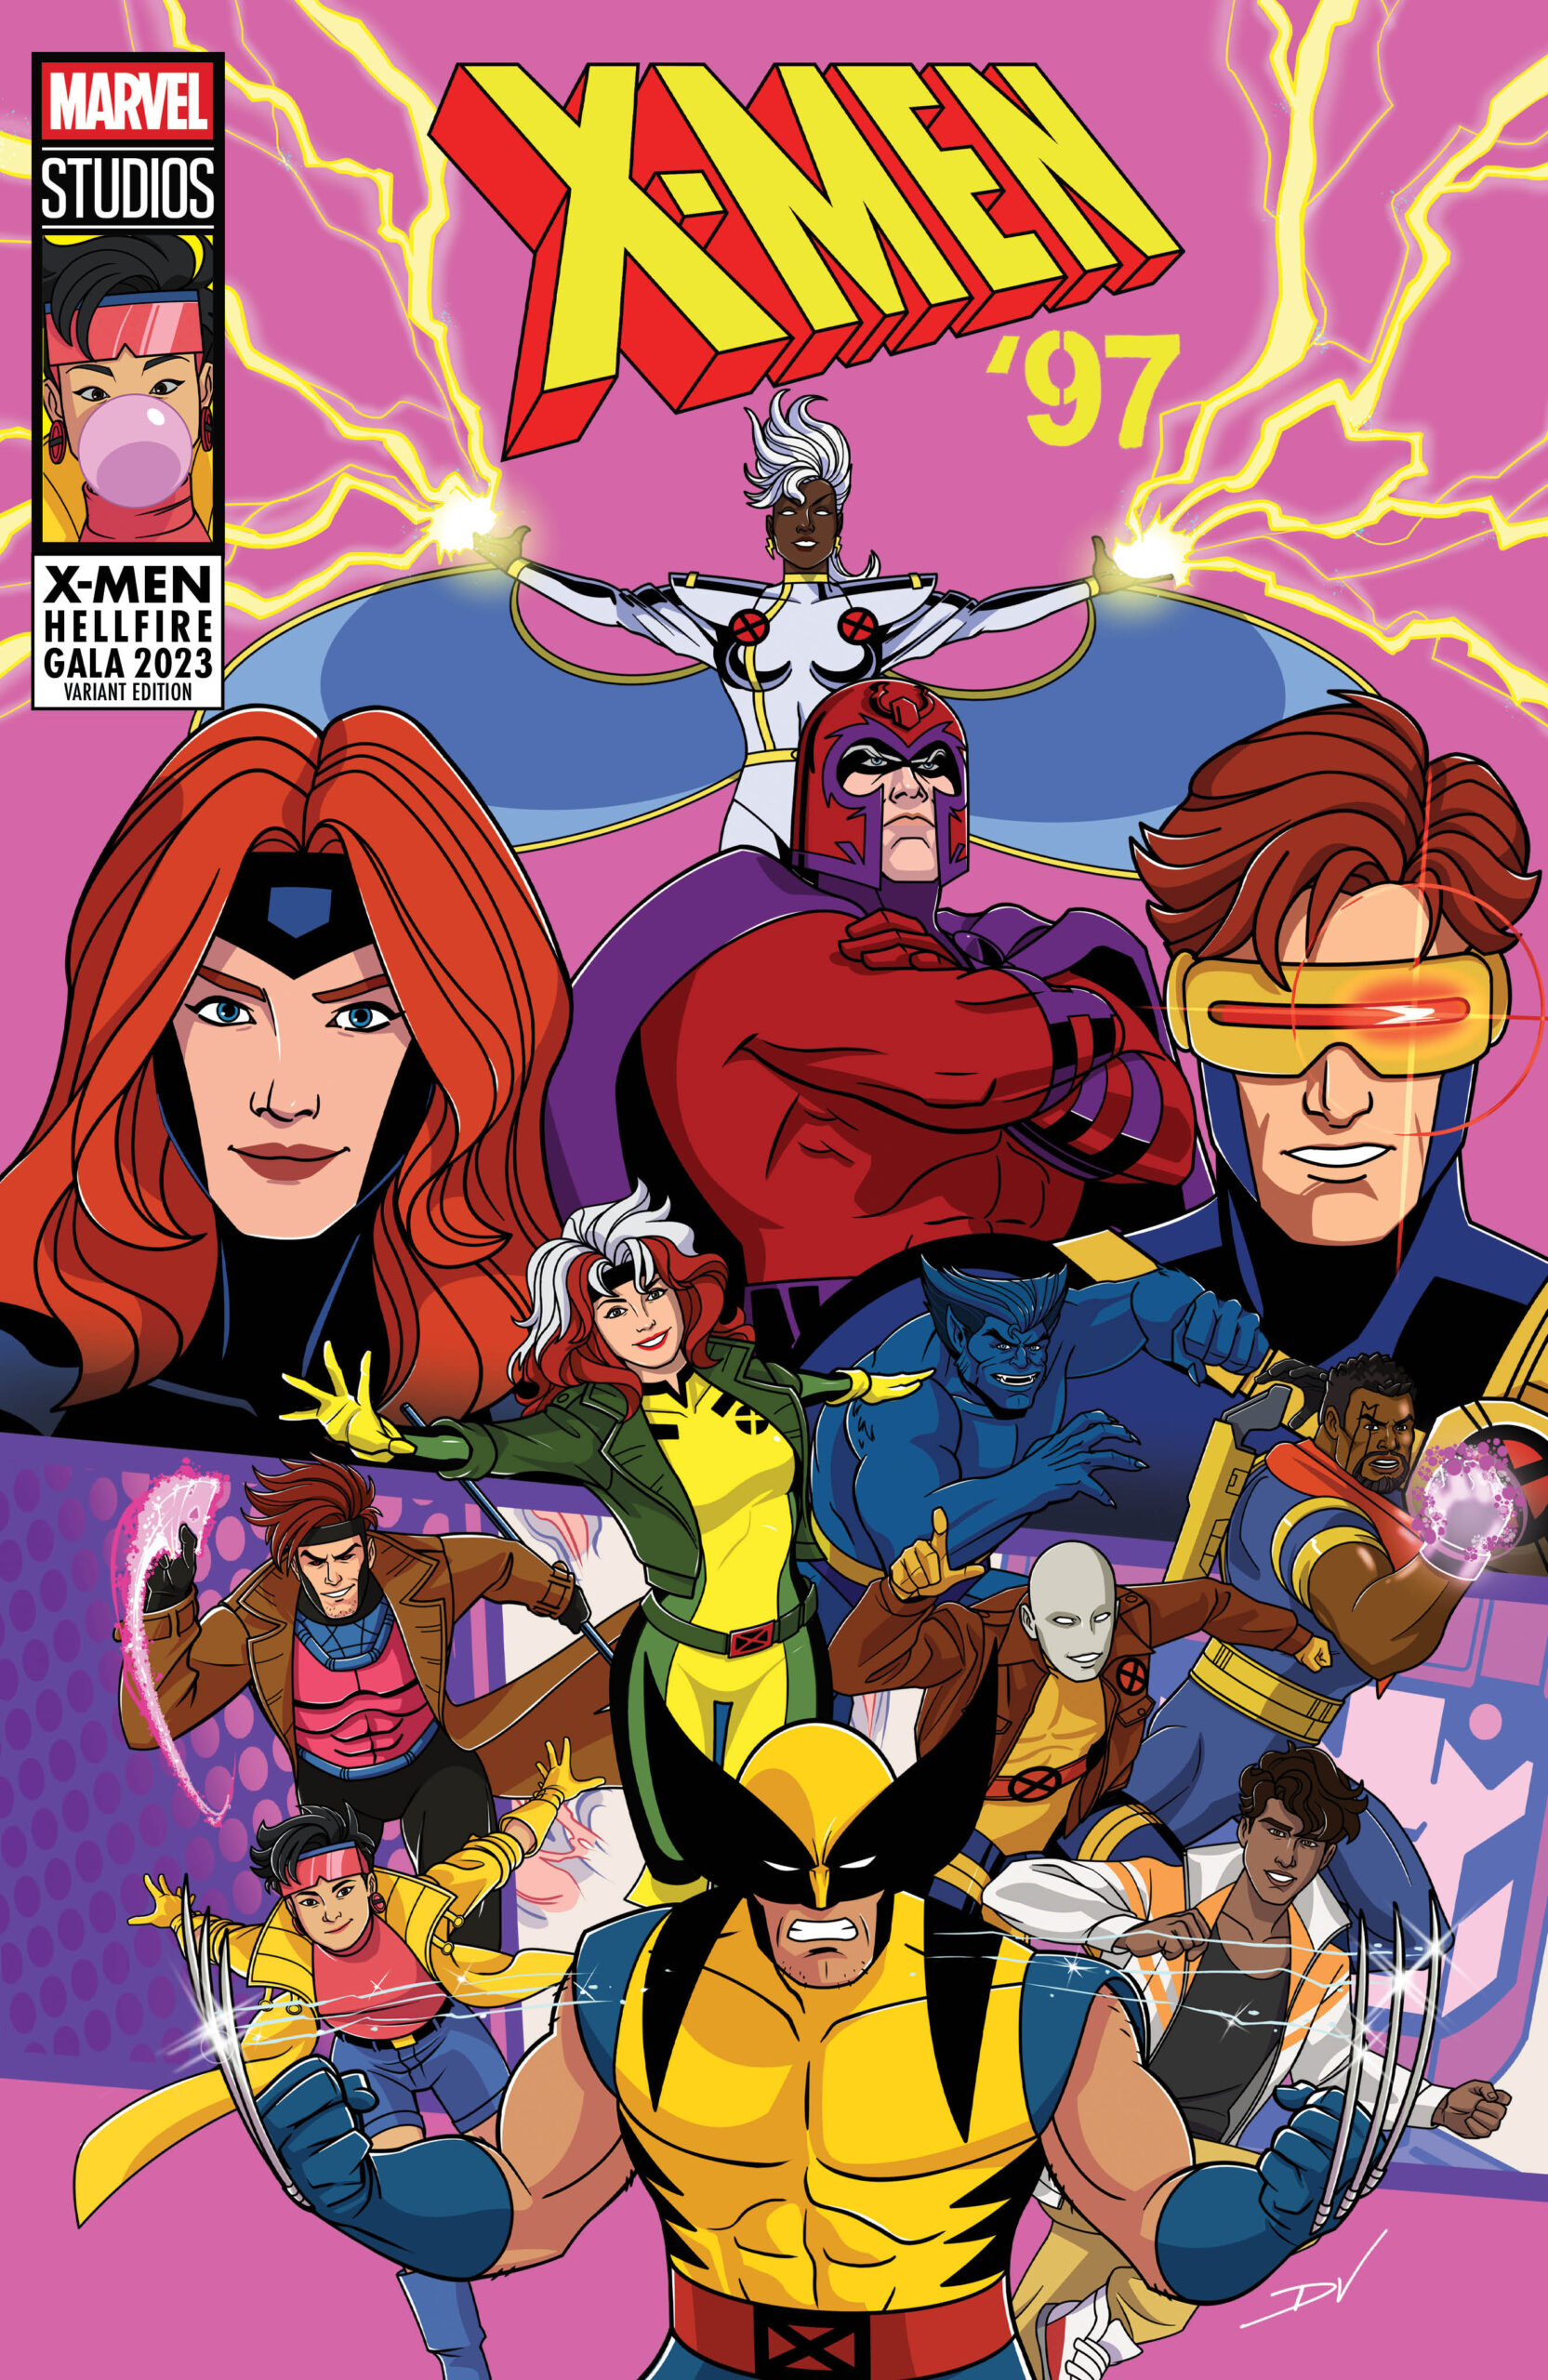 The Legendary X-Men ’97 Showcase In An Exciting X-Men: Hellfire Gala #1 Variant Cover!